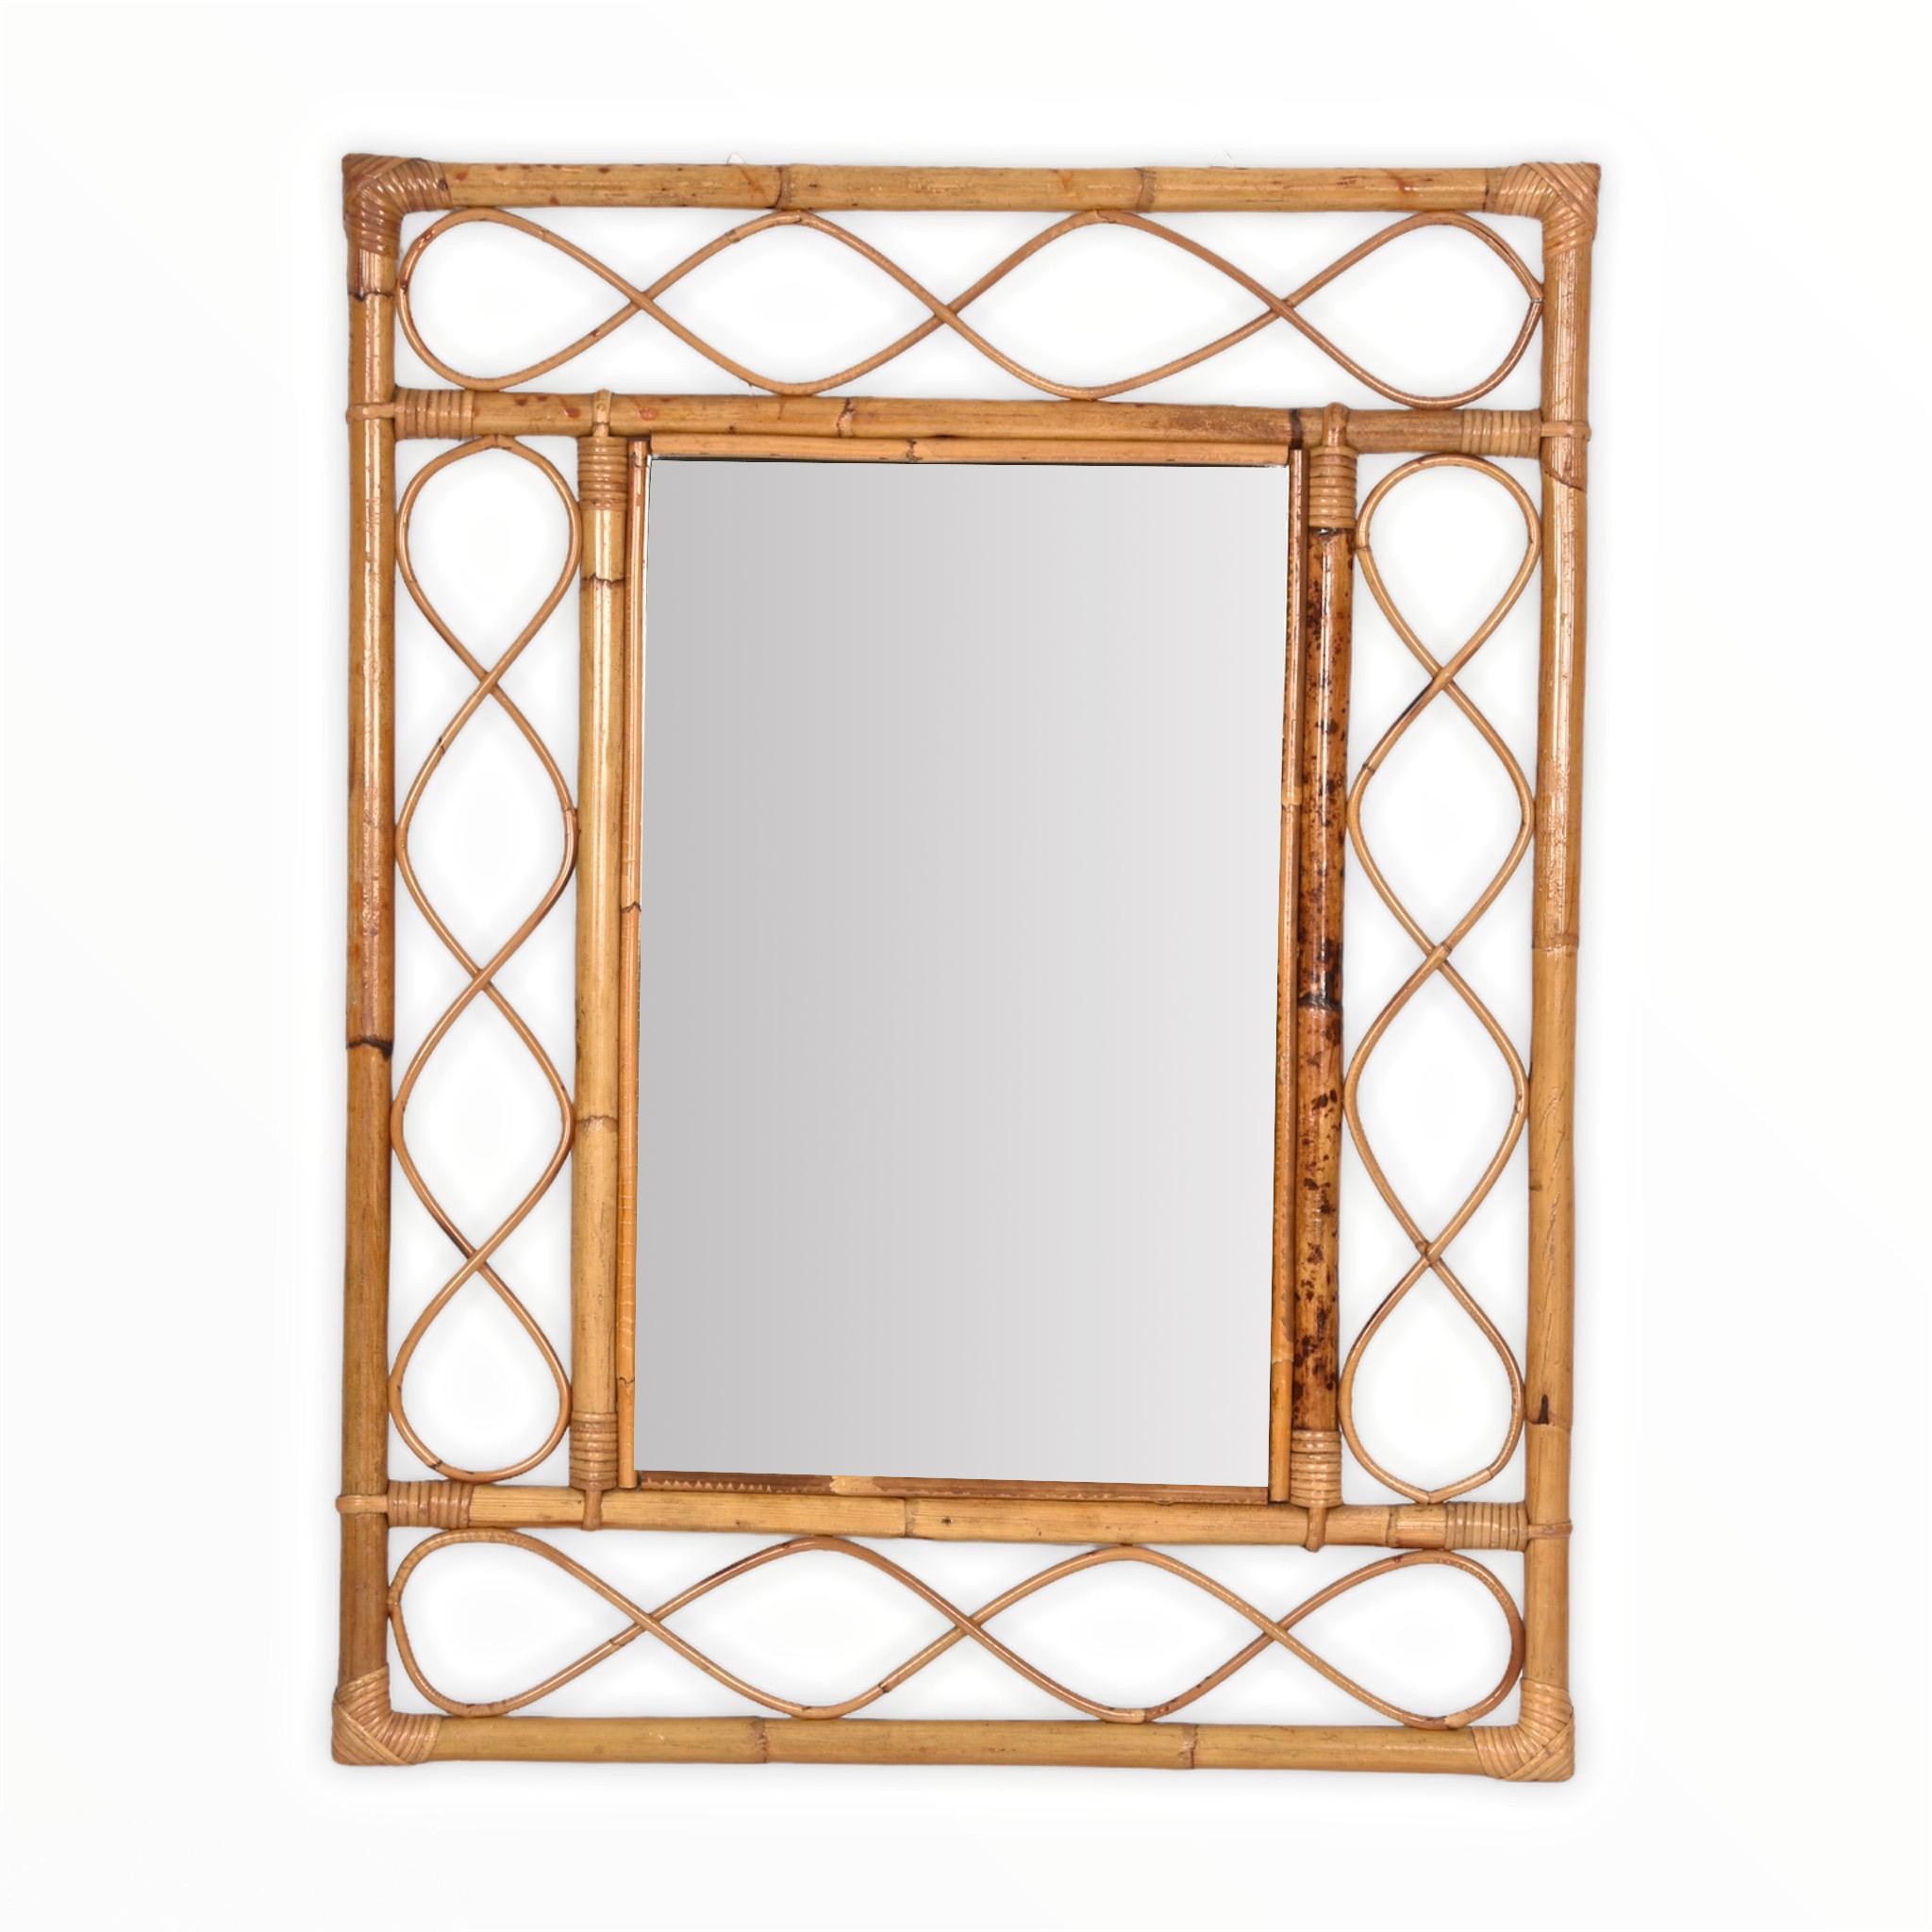 Midcentury French Riviera Bamboo and Rattan Rectangular Wall Mirror France 1960s 4